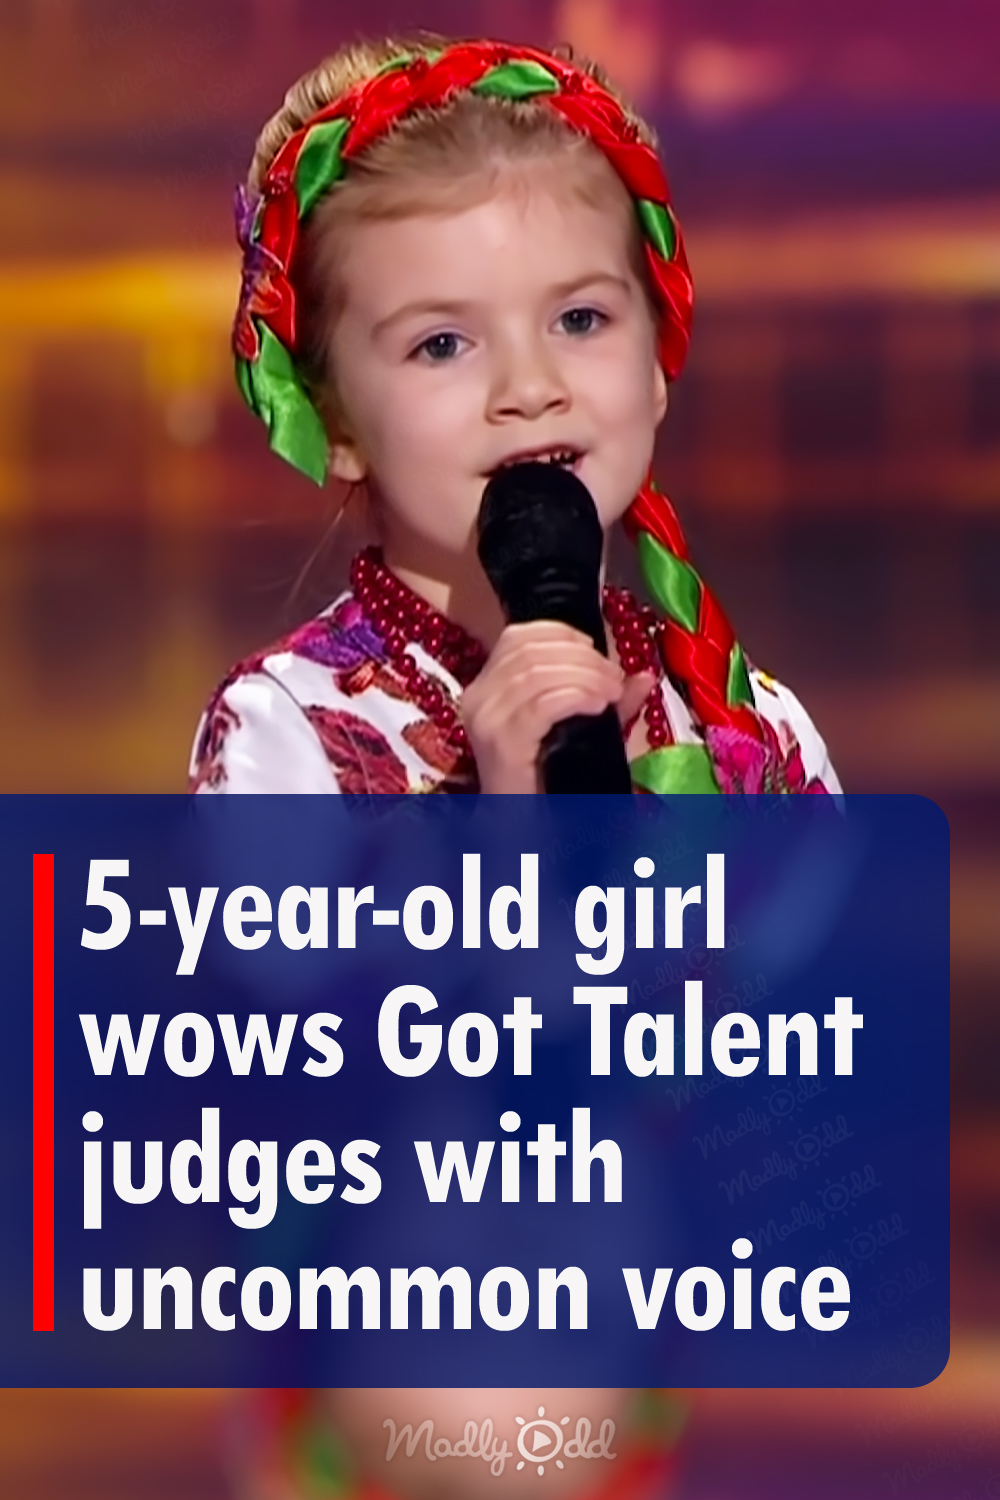 5-year-old girl wows Got Talent judges with uncommon voice